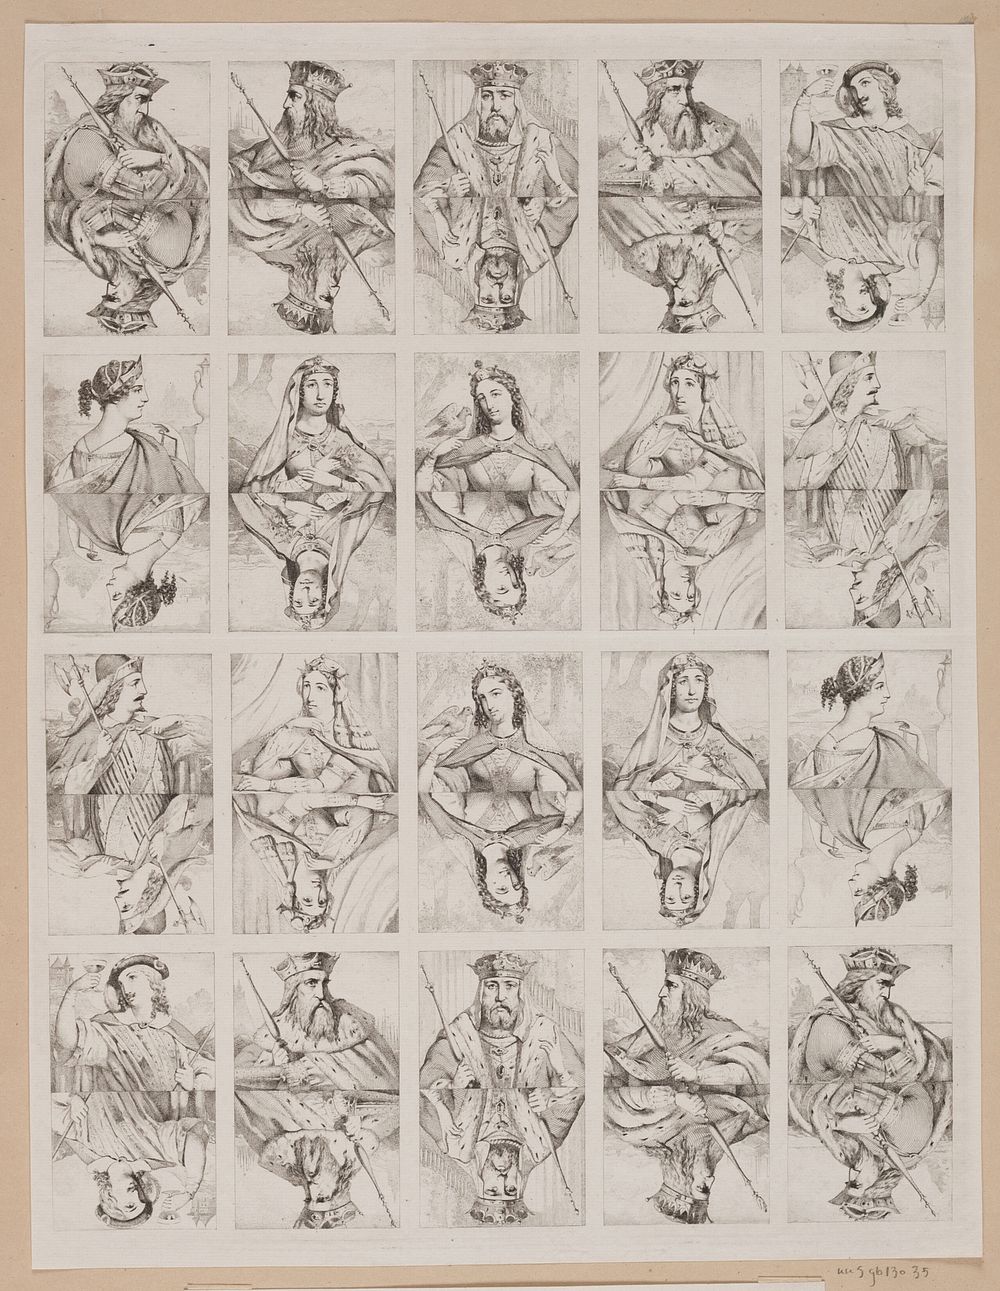 Etchings for playing cards, kings and queens by Sophus Schack